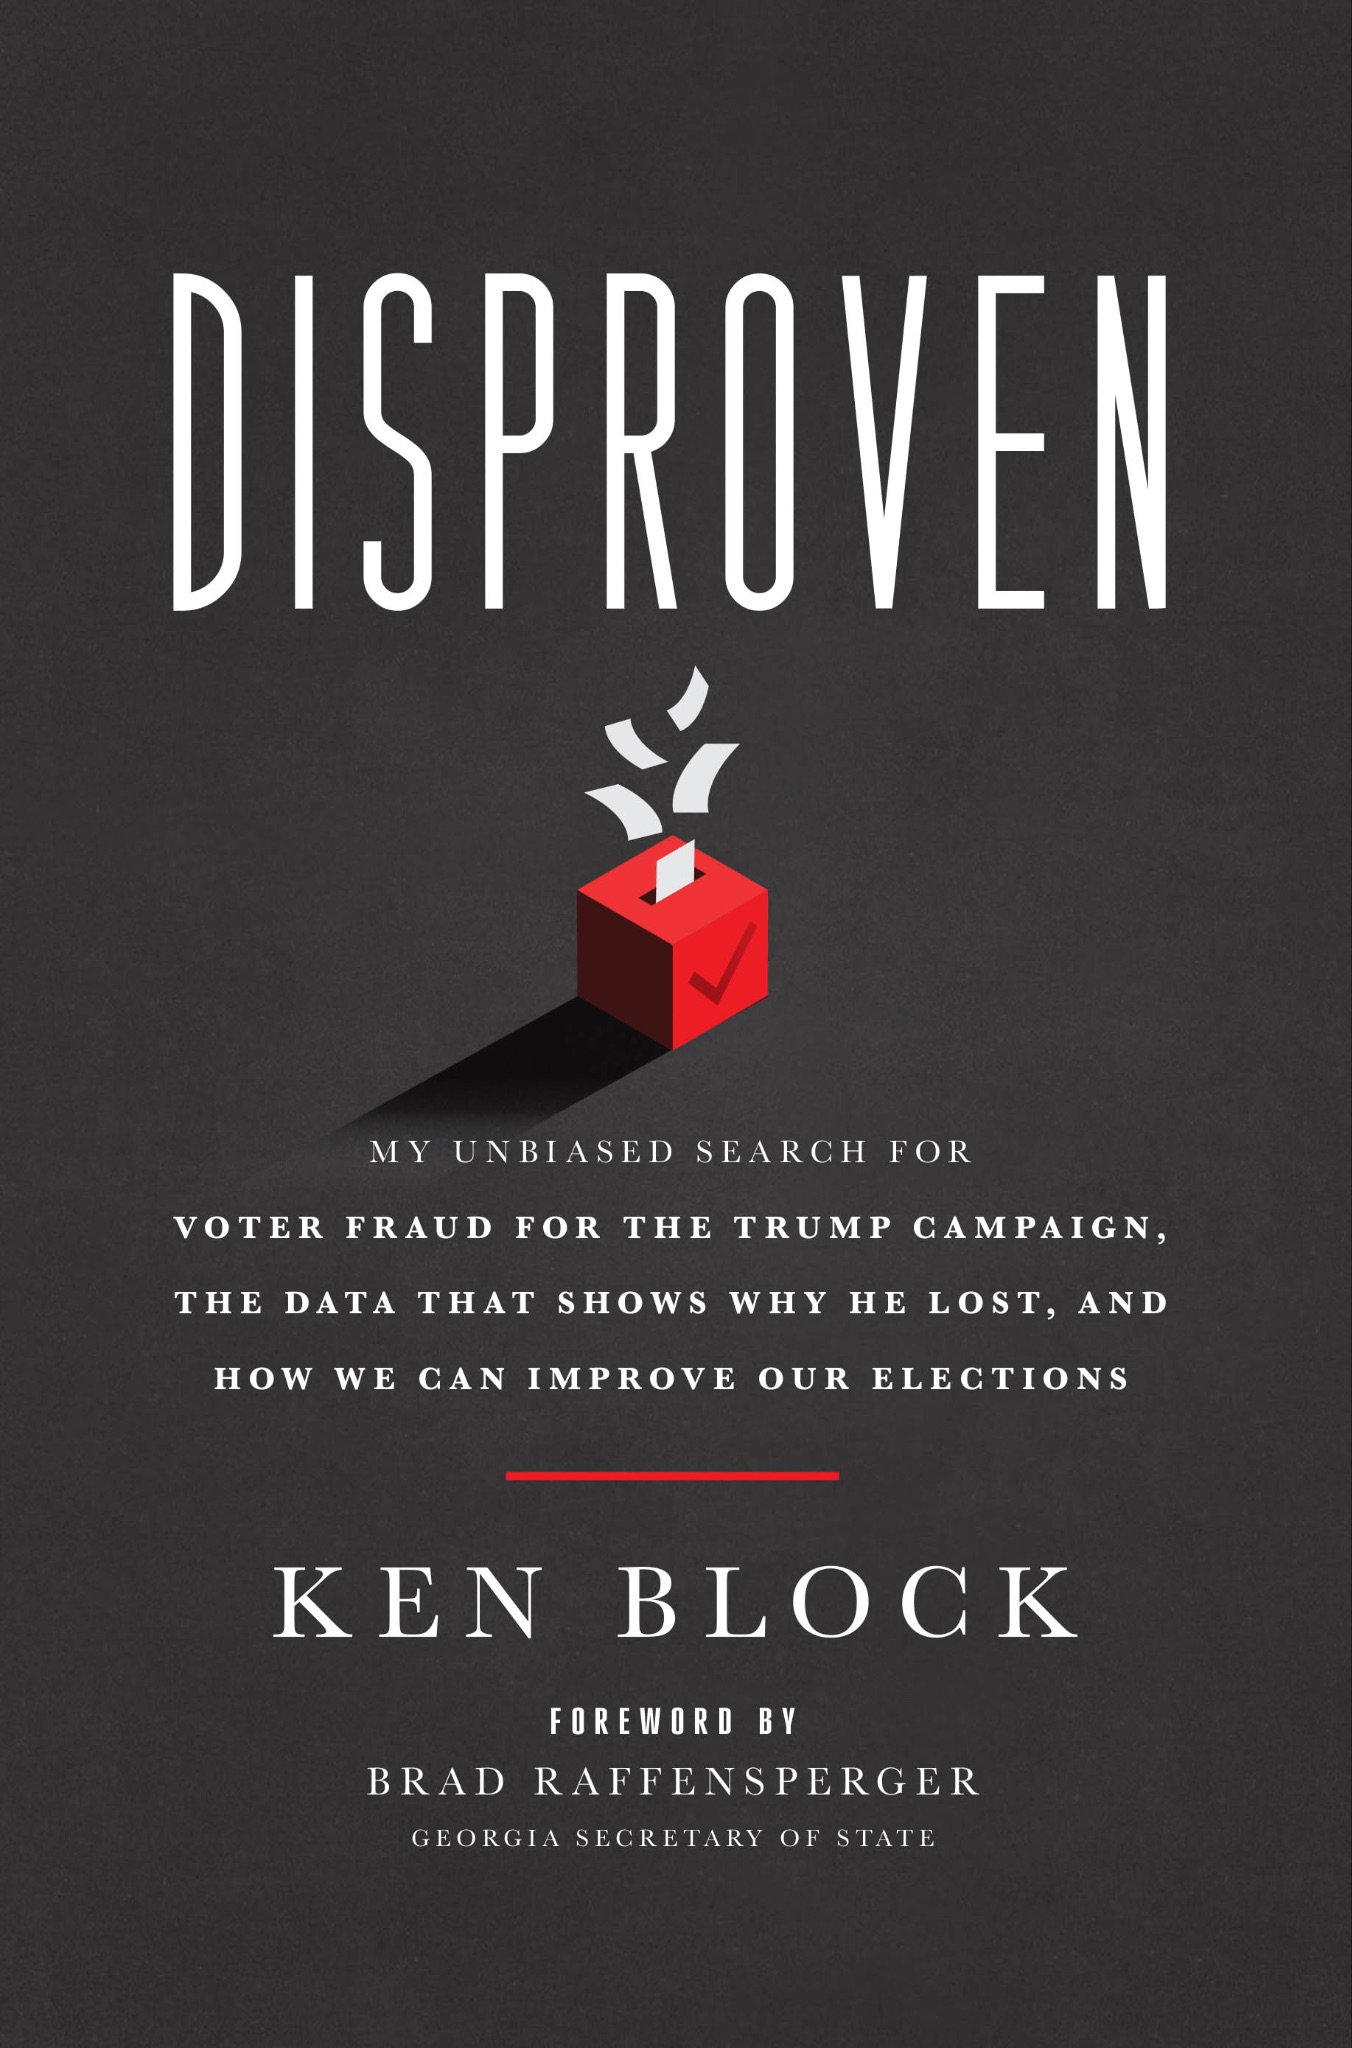 Book cover image of DISPROVEN by Ken Block